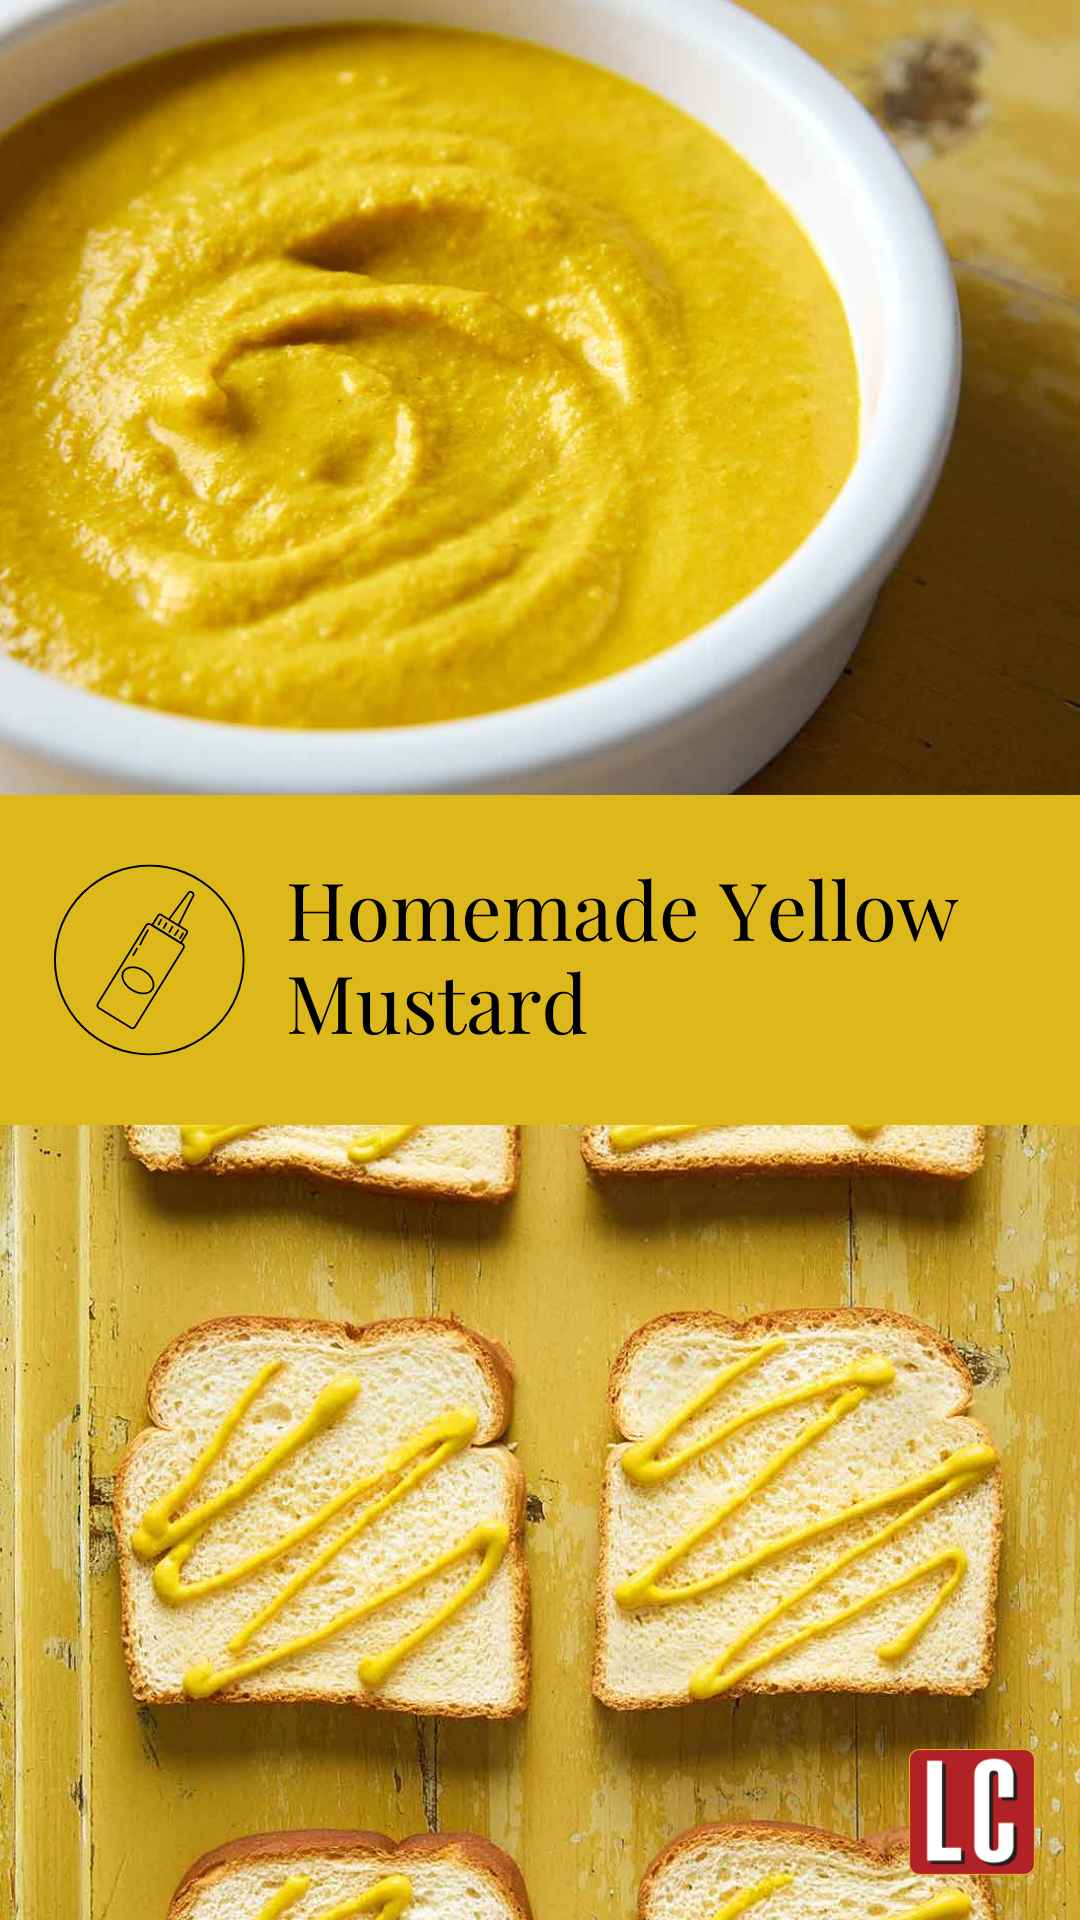 A small white dish filled with yellow mustard and slices of bread with mustard squiggles on them.